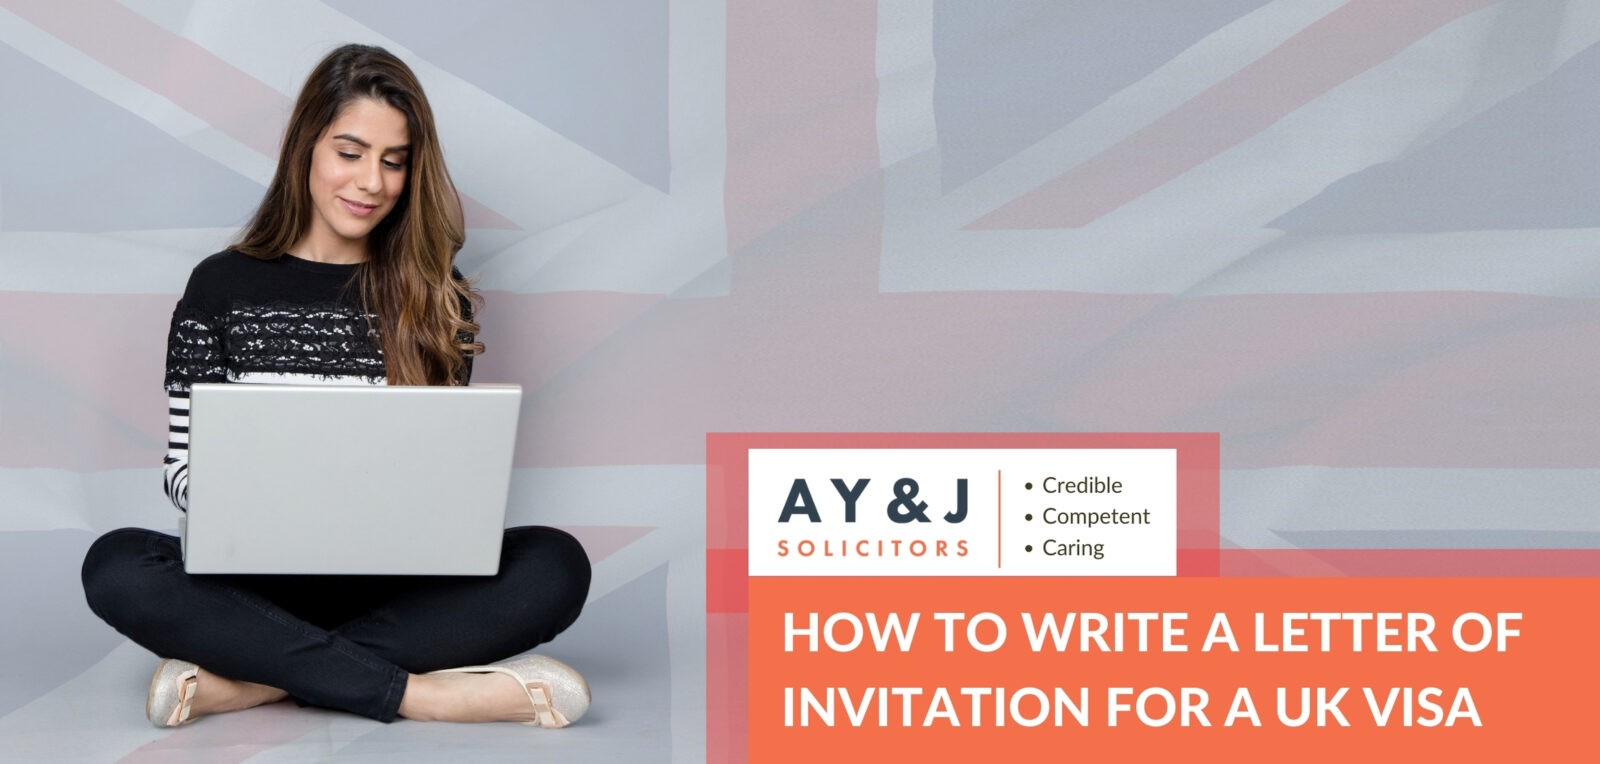 How to Write a Invitation Letter for UK Visa?